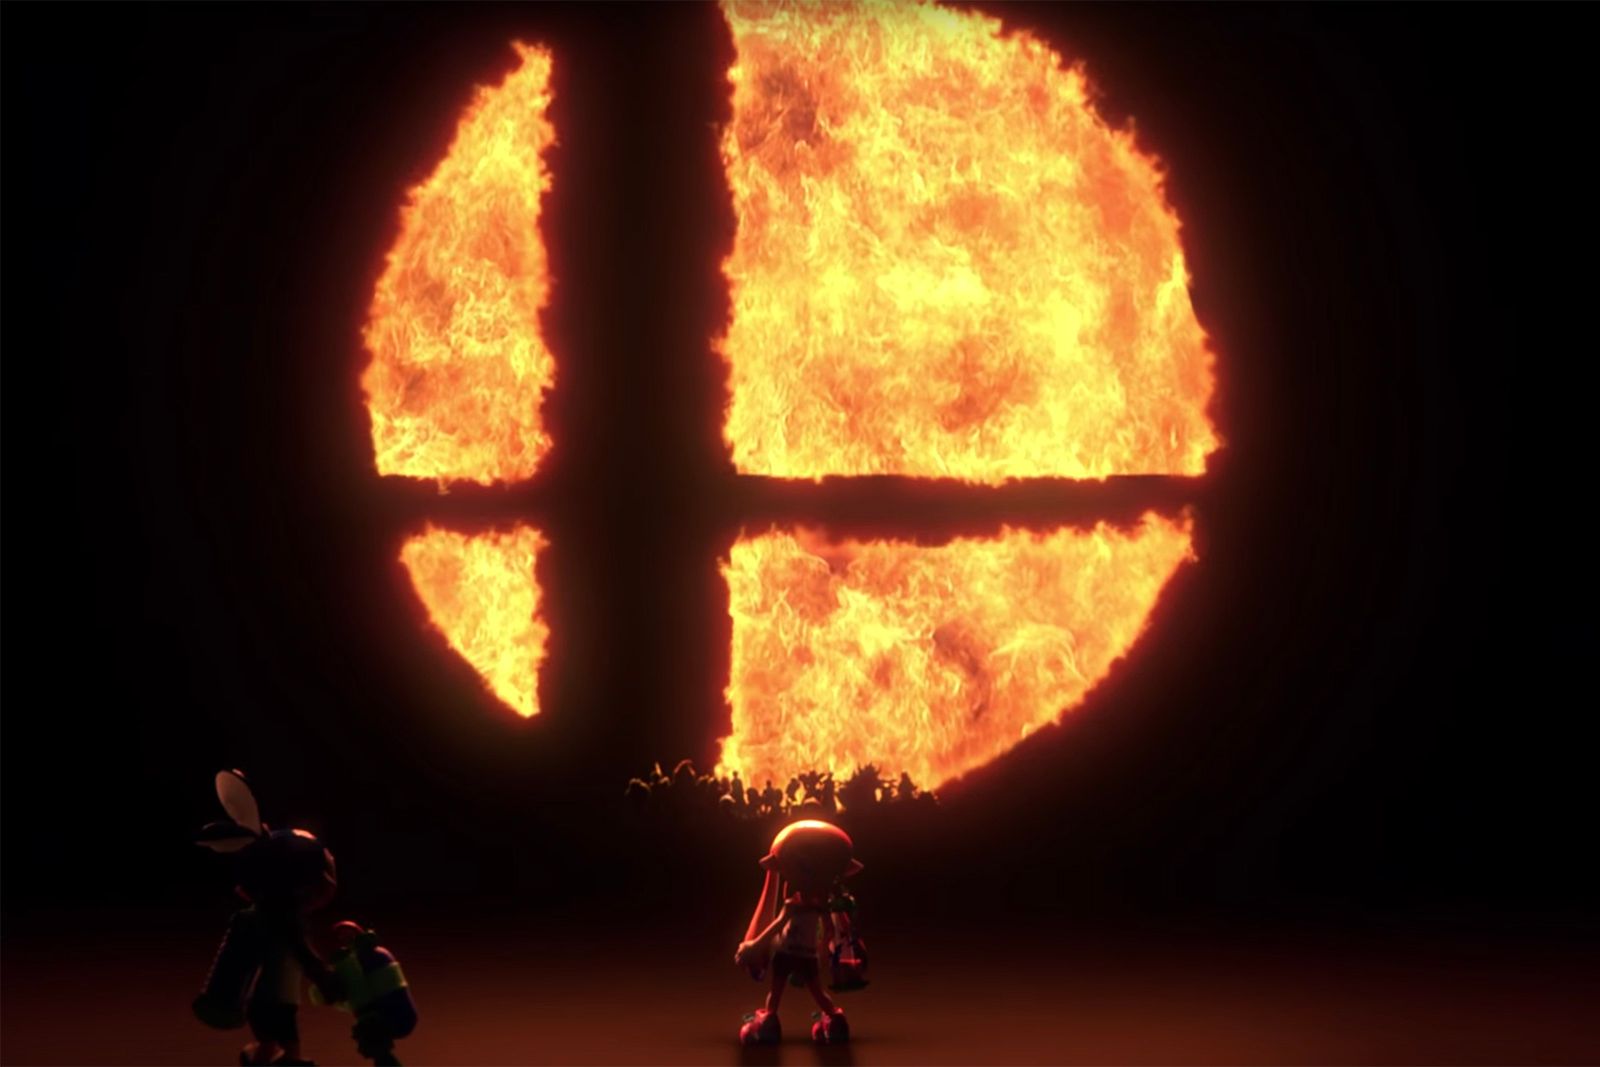 Super Smash Bros coming to Nintendo Switch watch the trailer here image 1